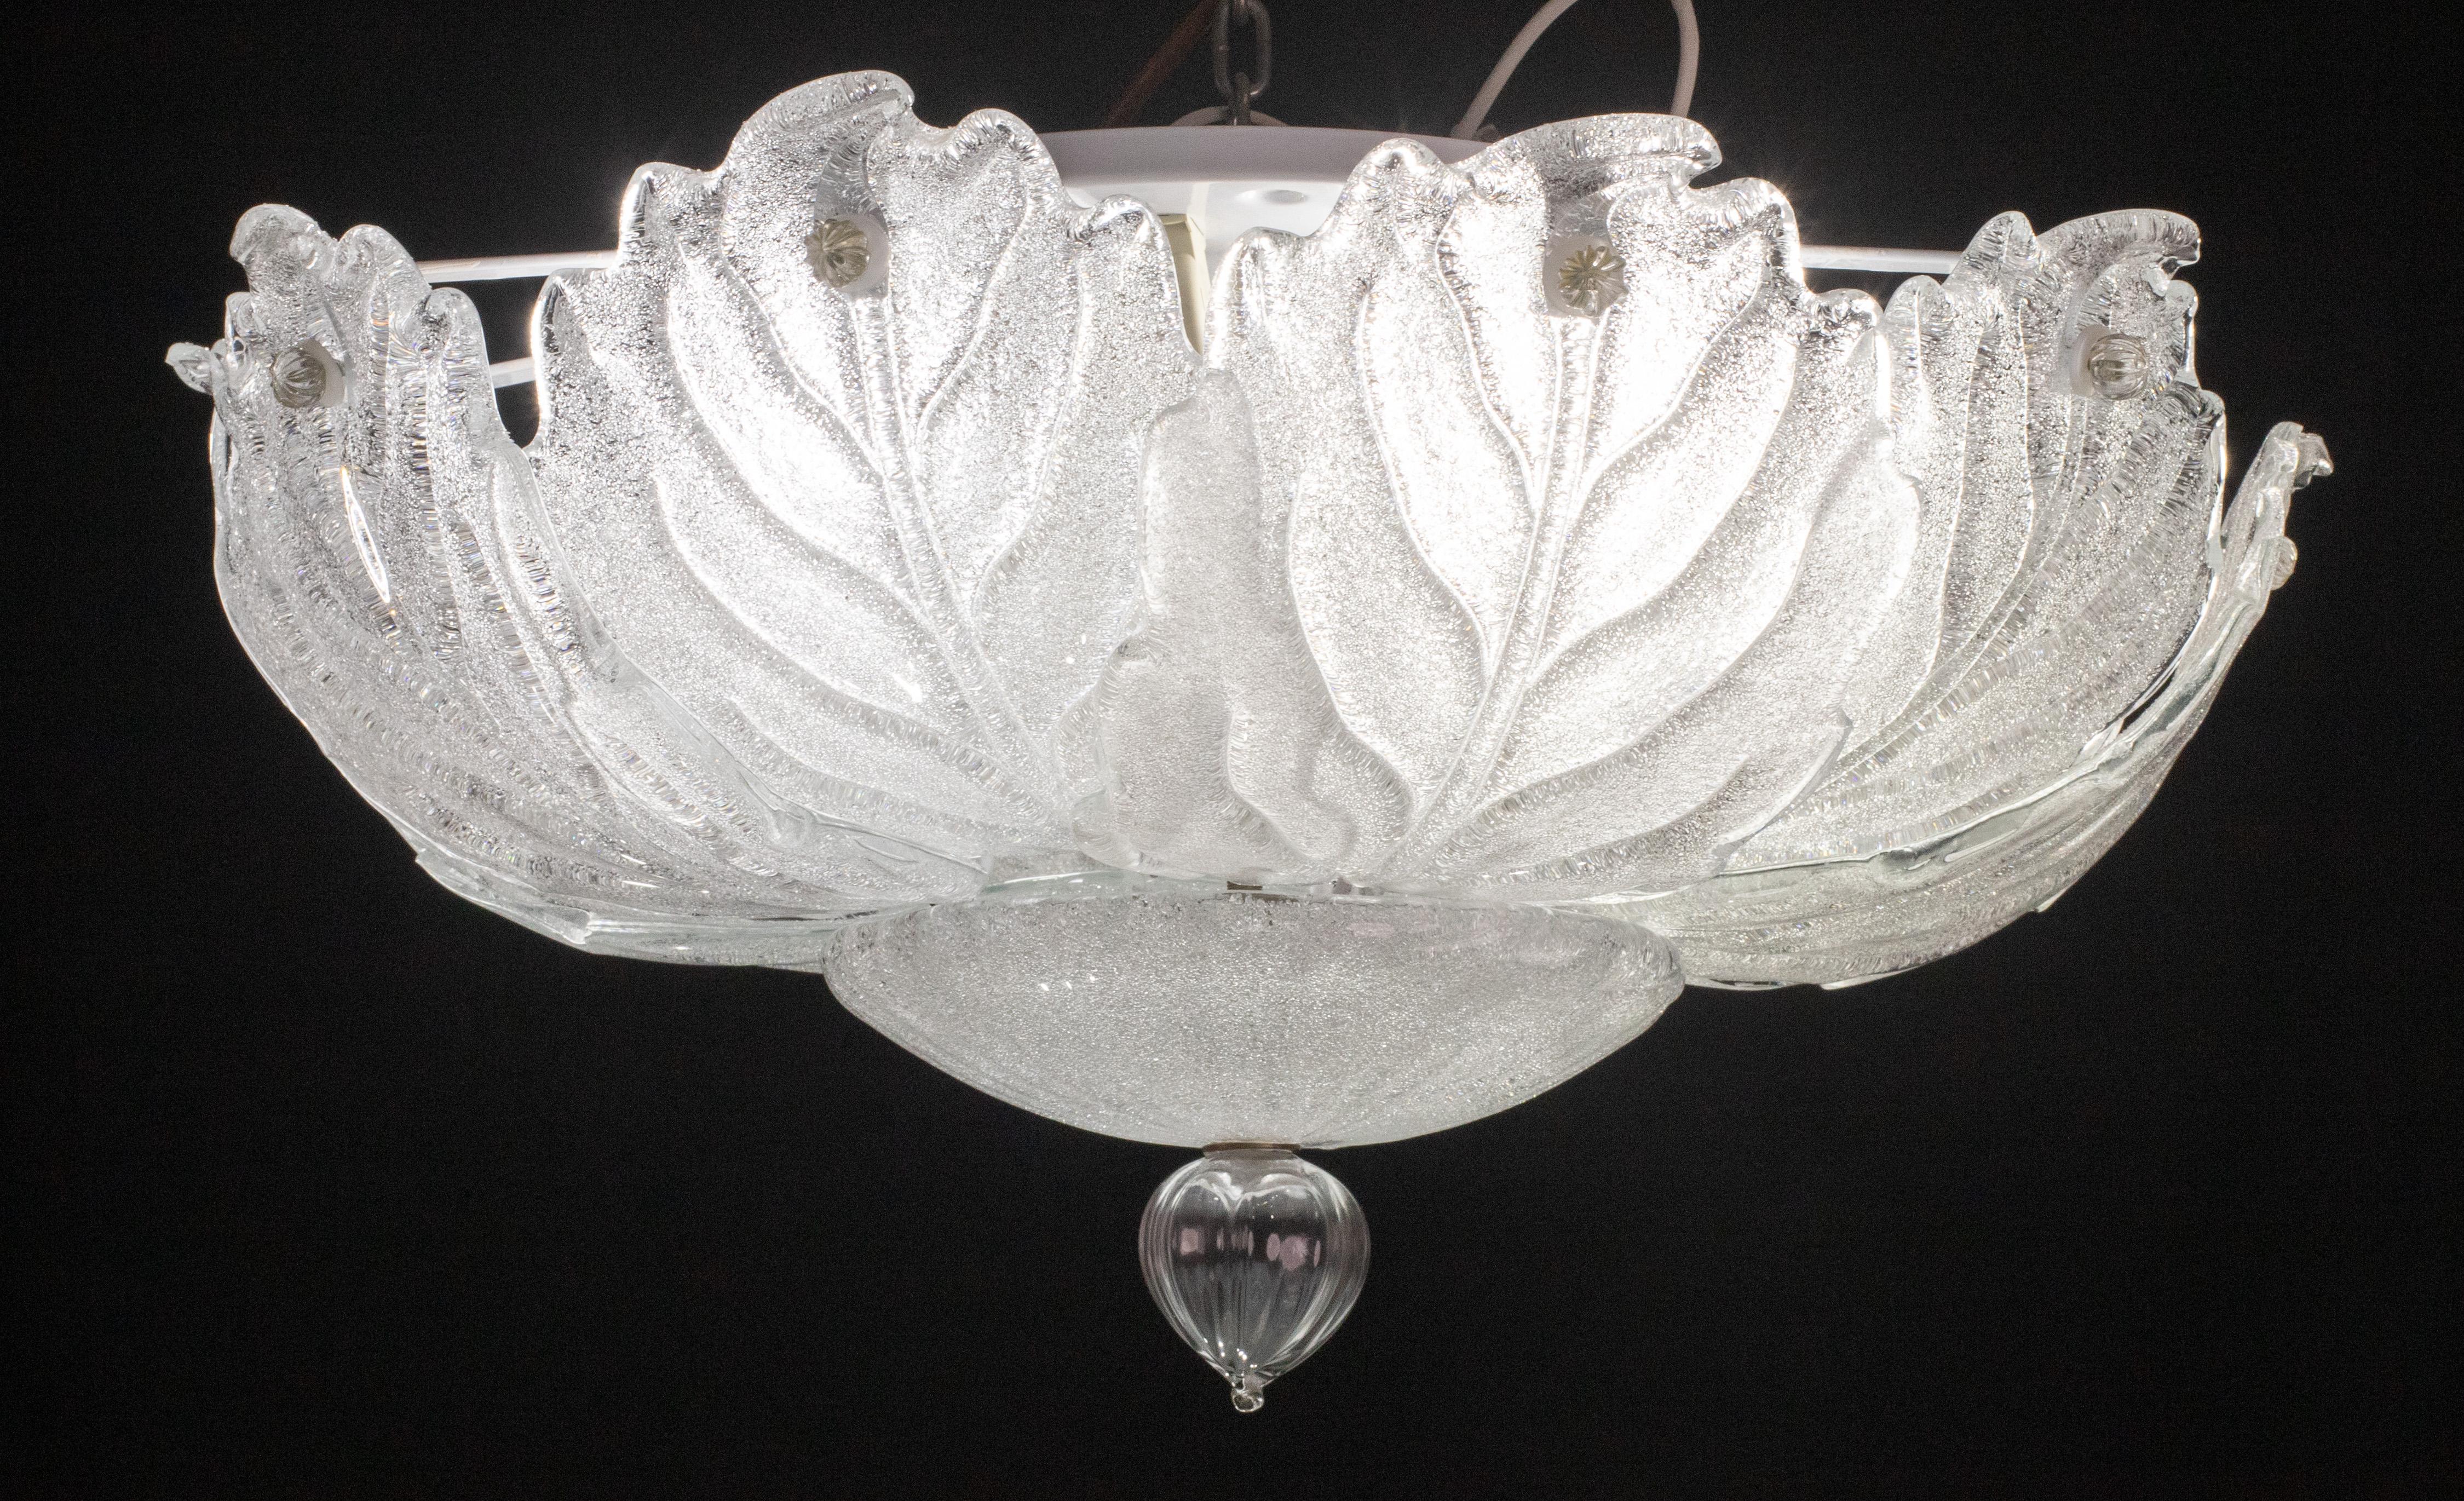 Splendid Murano glass ceiling lamp.

Period: circa 1970.

The light mounts 4 standard European e27 lamp holders, possible rewire for Usa.

Perfect for decorating a large space.

Height measures 35 centimeters from the ceiling, diameter about 60